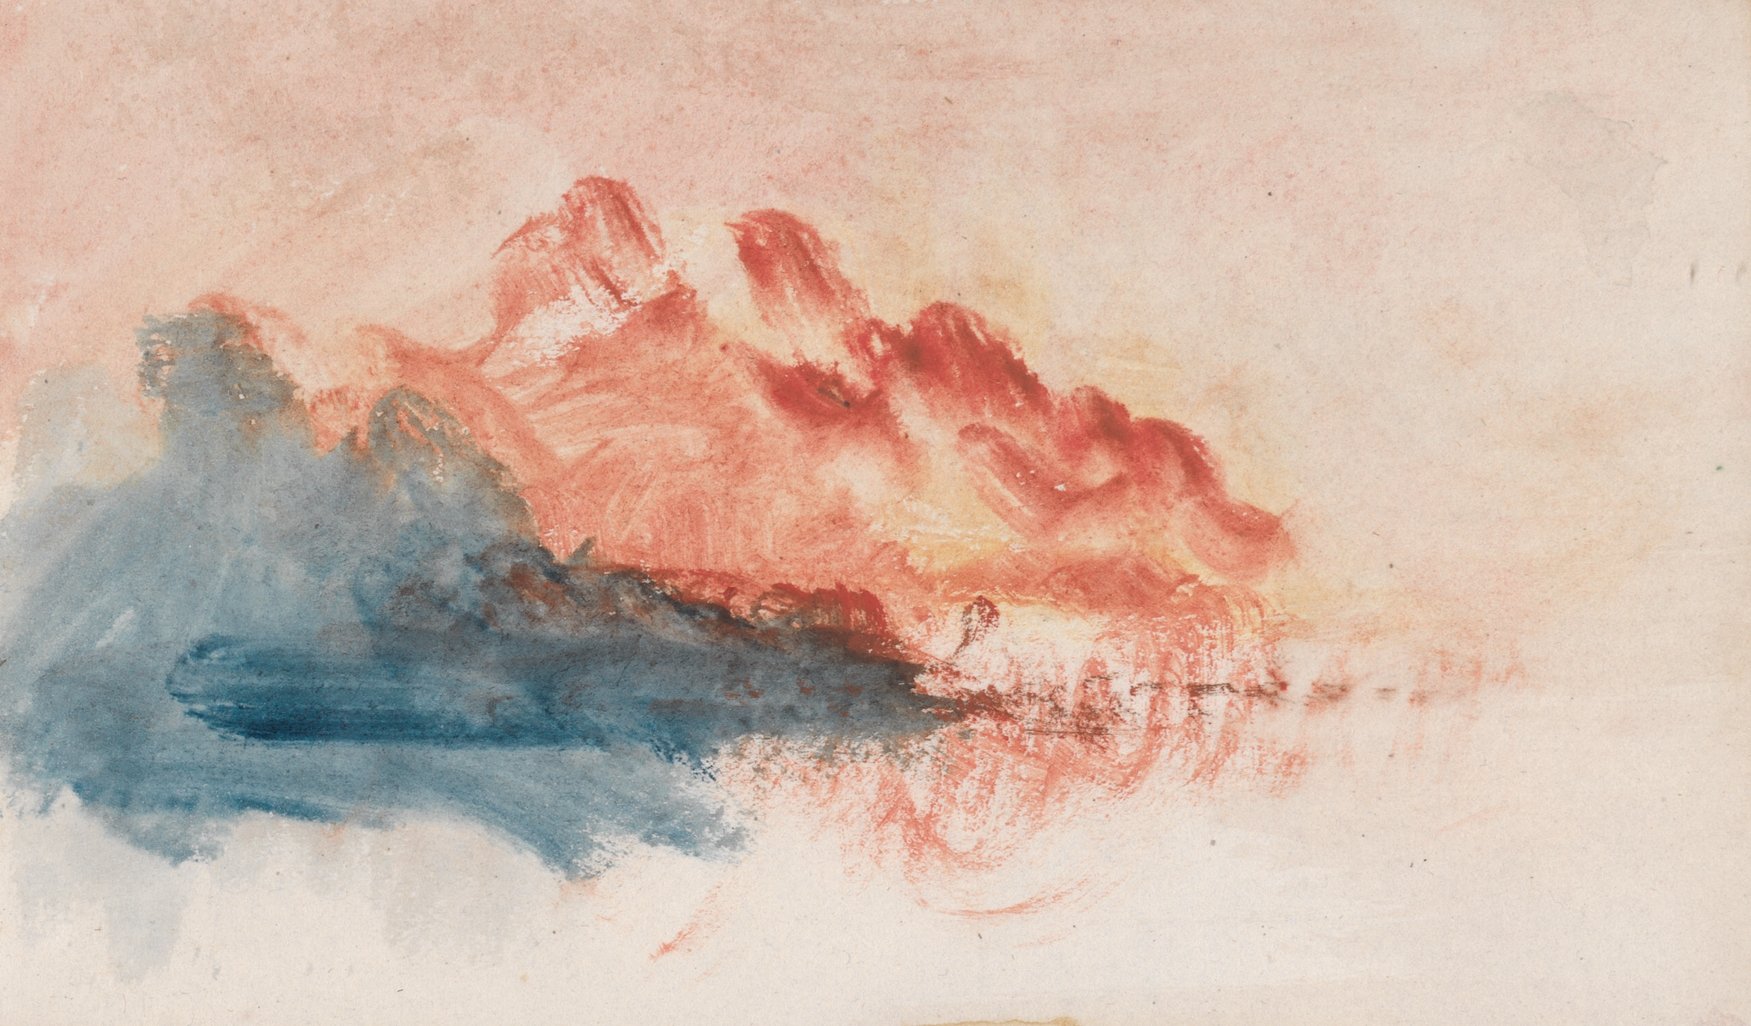 The Channel Sketchbook 45 (ca. 1845)